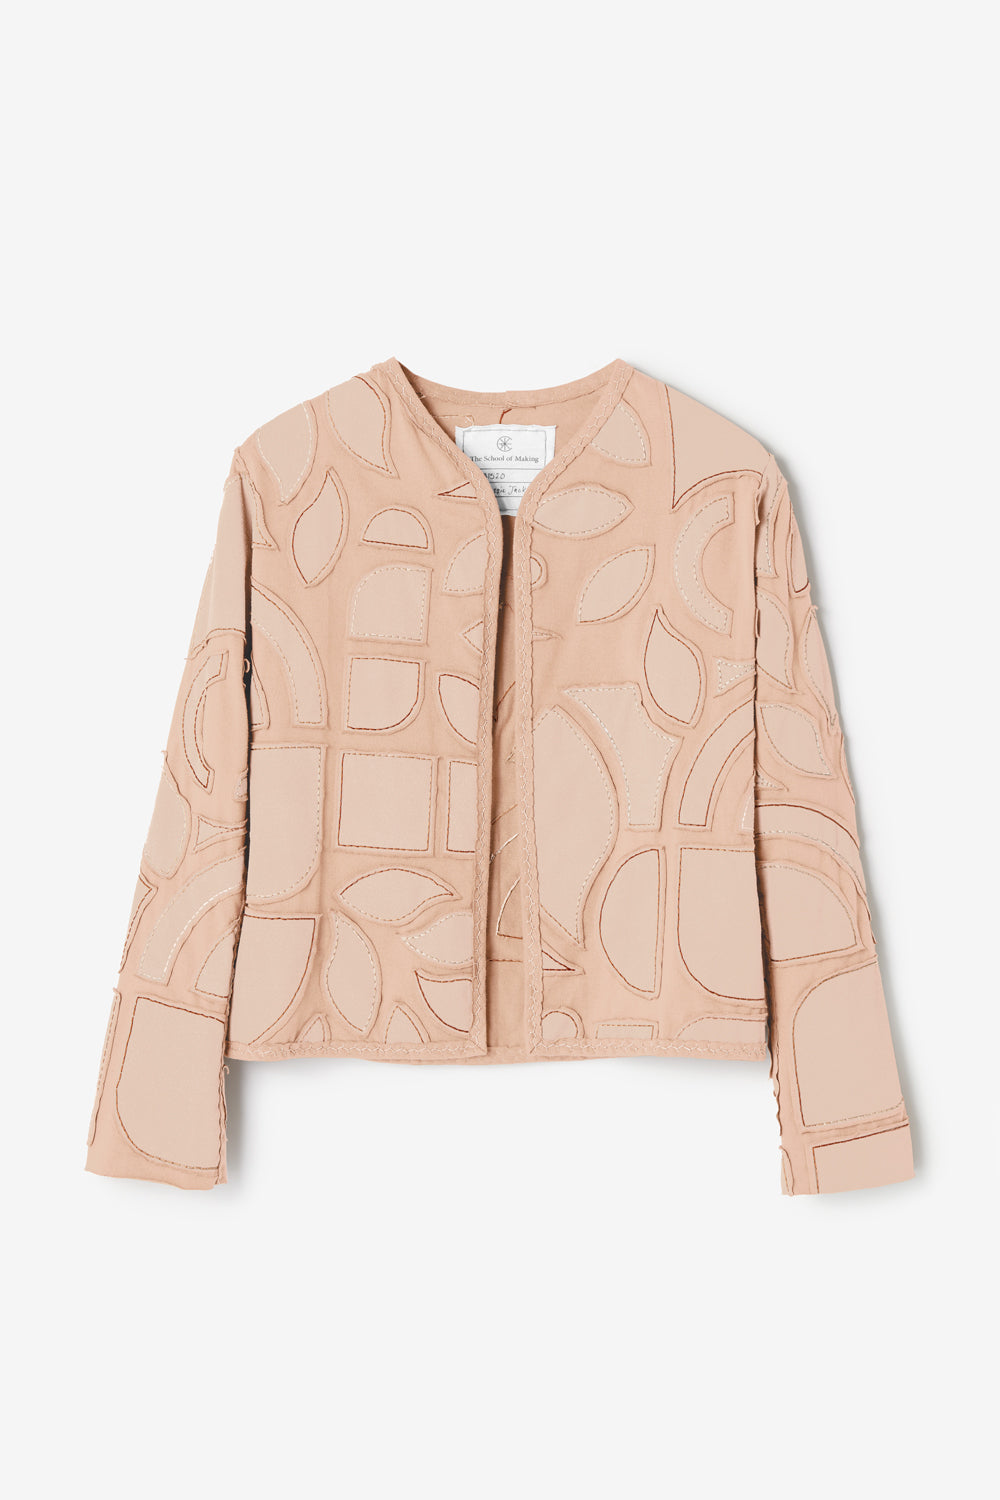 The School of Making Classic Jacket in Ballet with abstract stencil design.